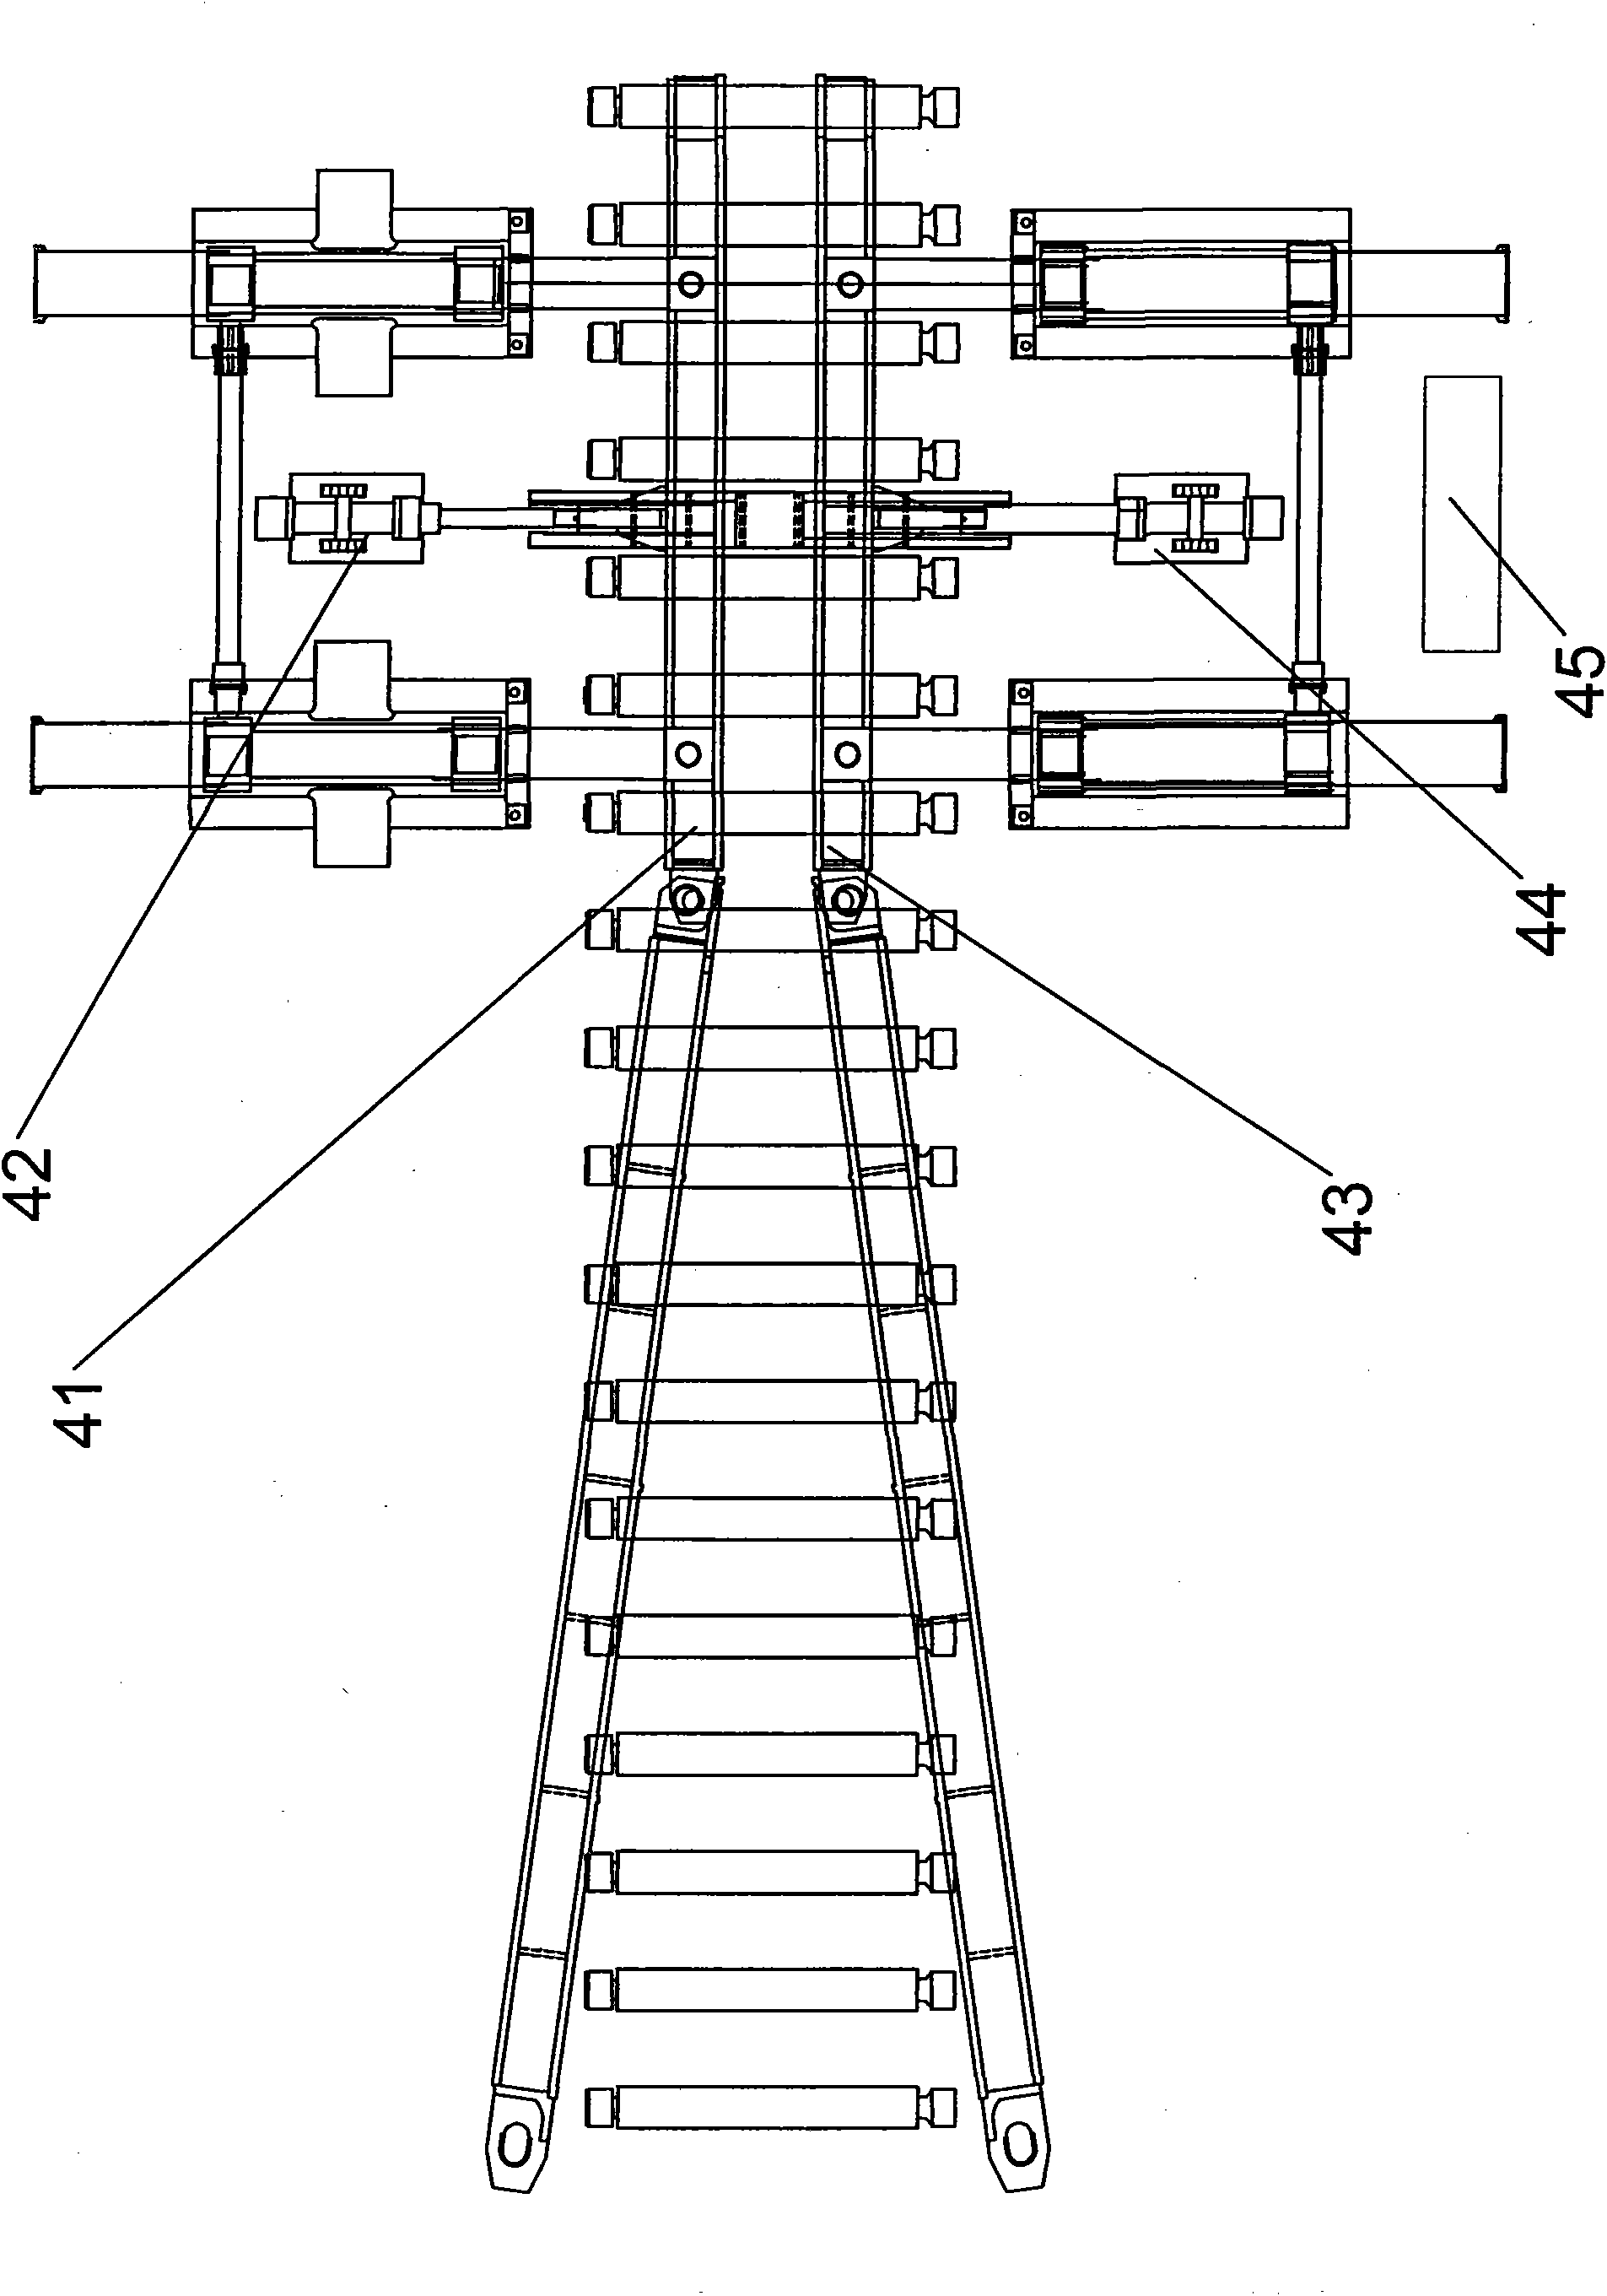 Control method of alternative pressure of side guides of hot strip mill coiler